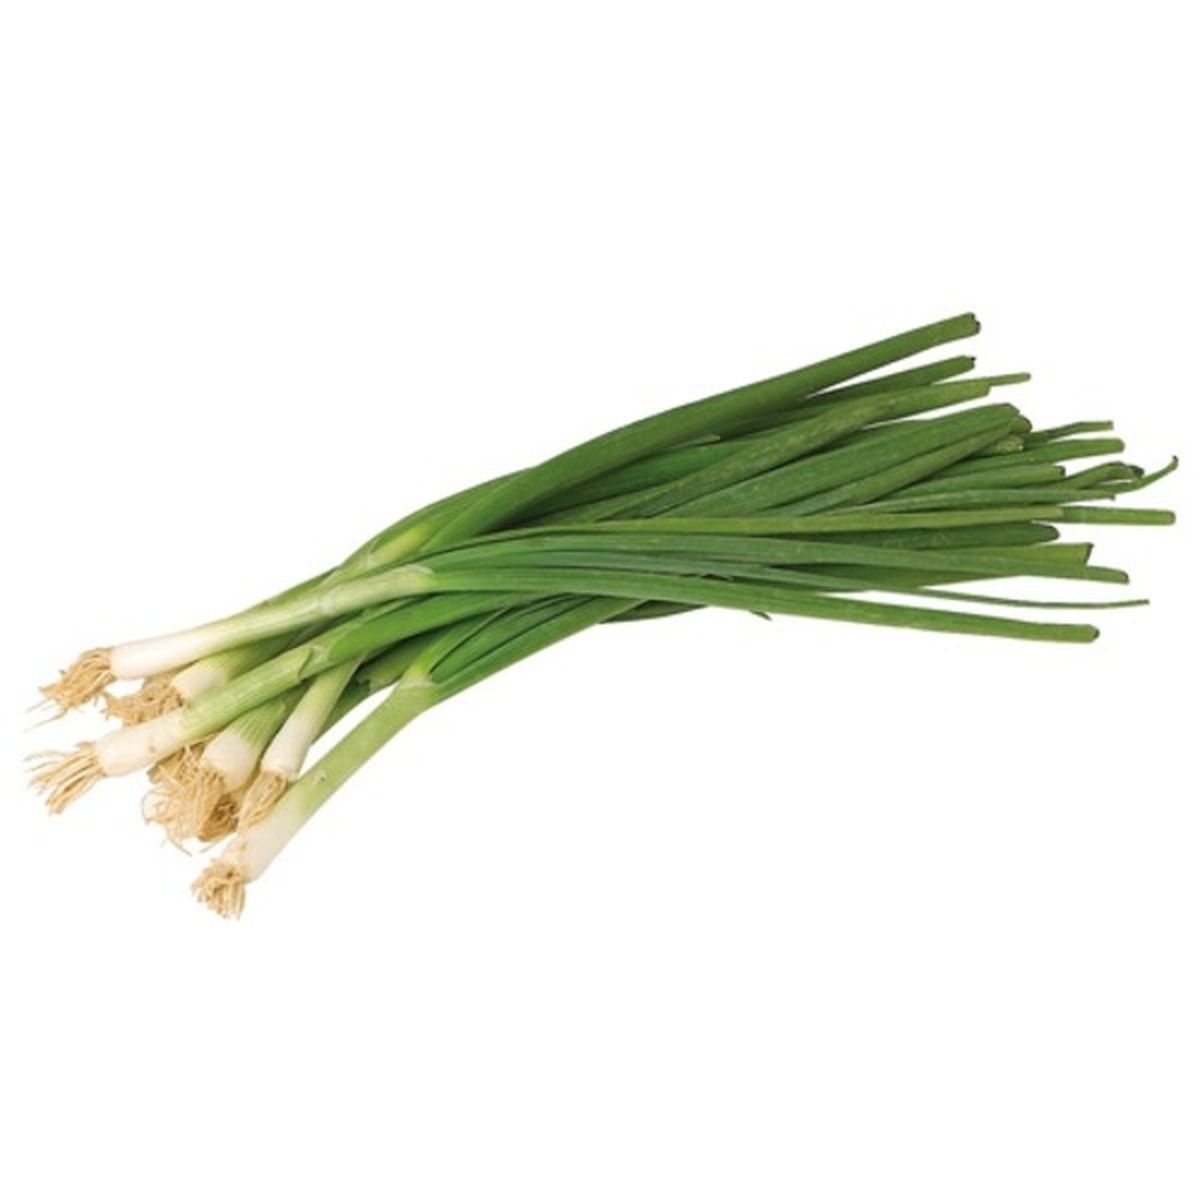 Calories in Green Onions (Scallions)